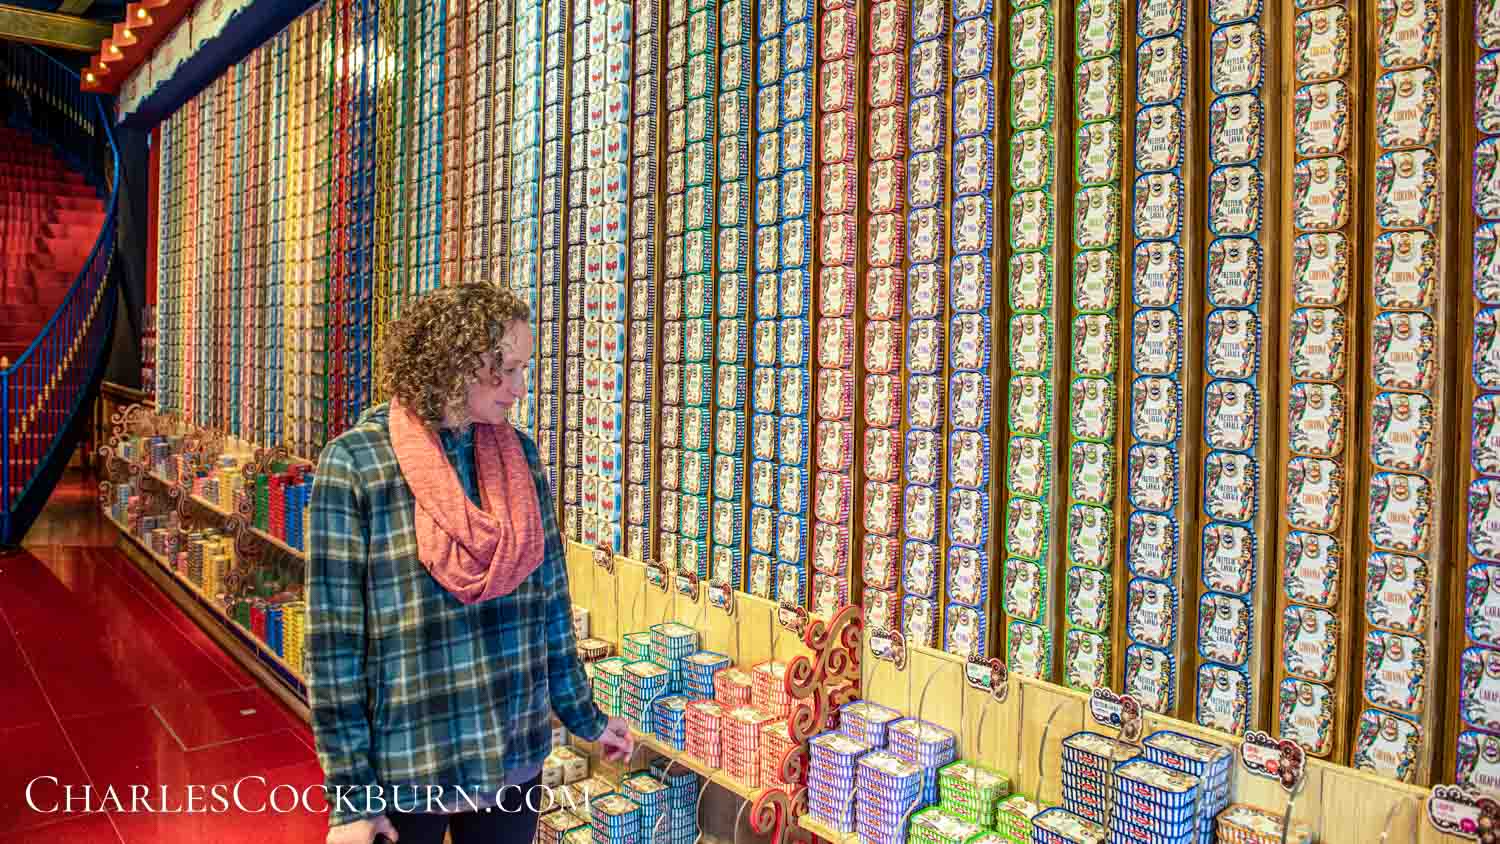 Walls of canned fish in Portugal